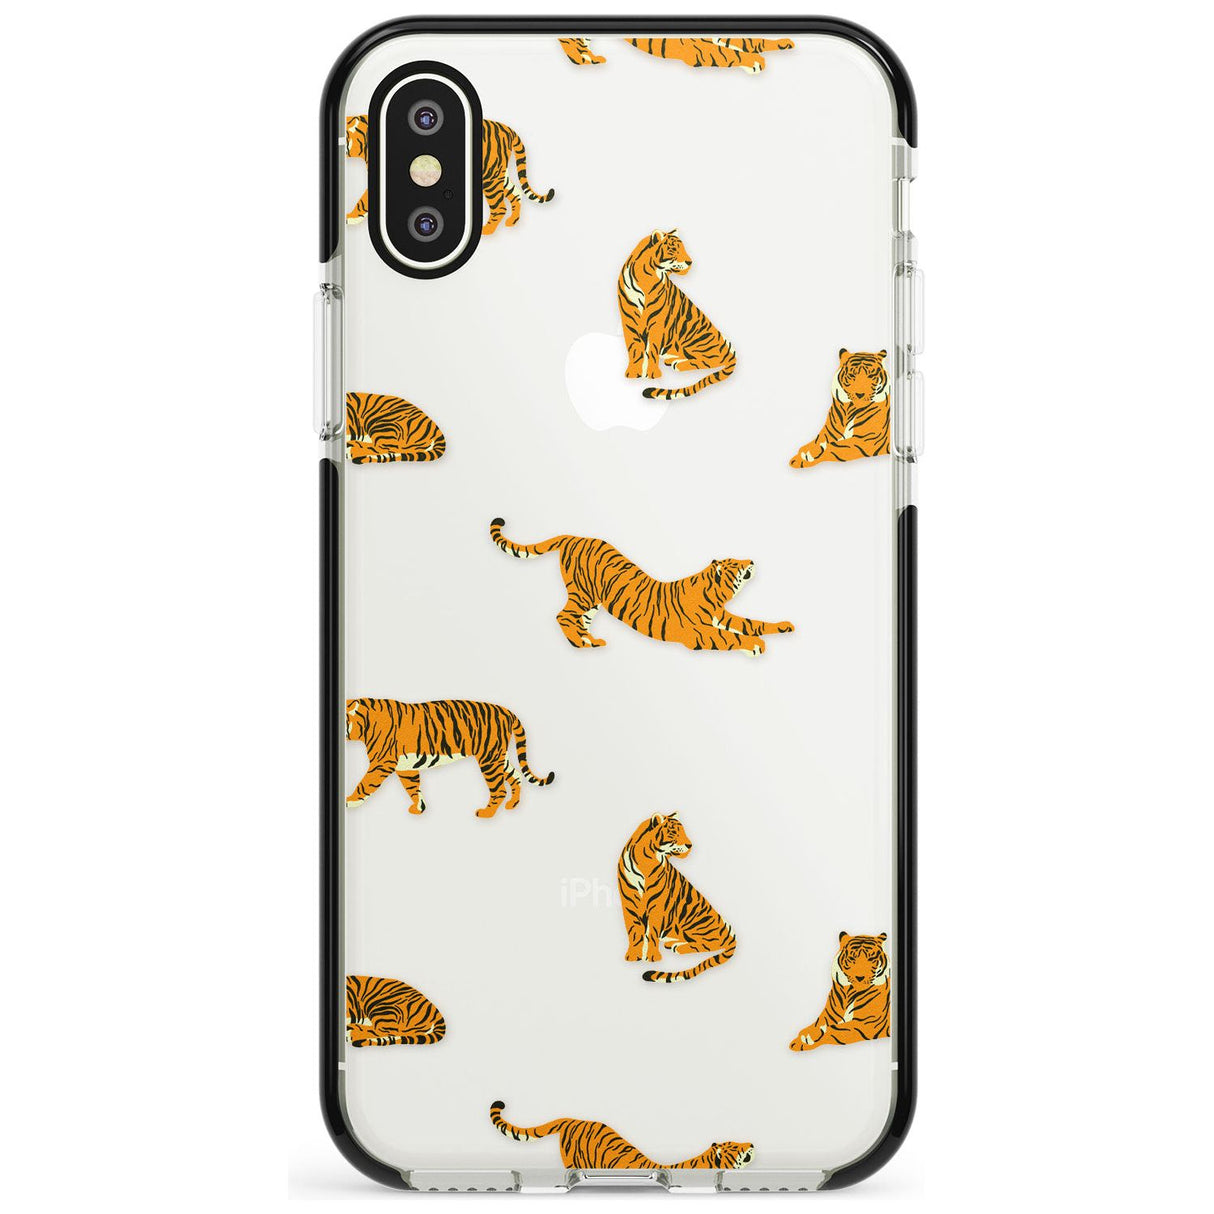 Clear Tiger Jungle Cat Pattern Black Impact Phone Case for iPhone X XS Max XR